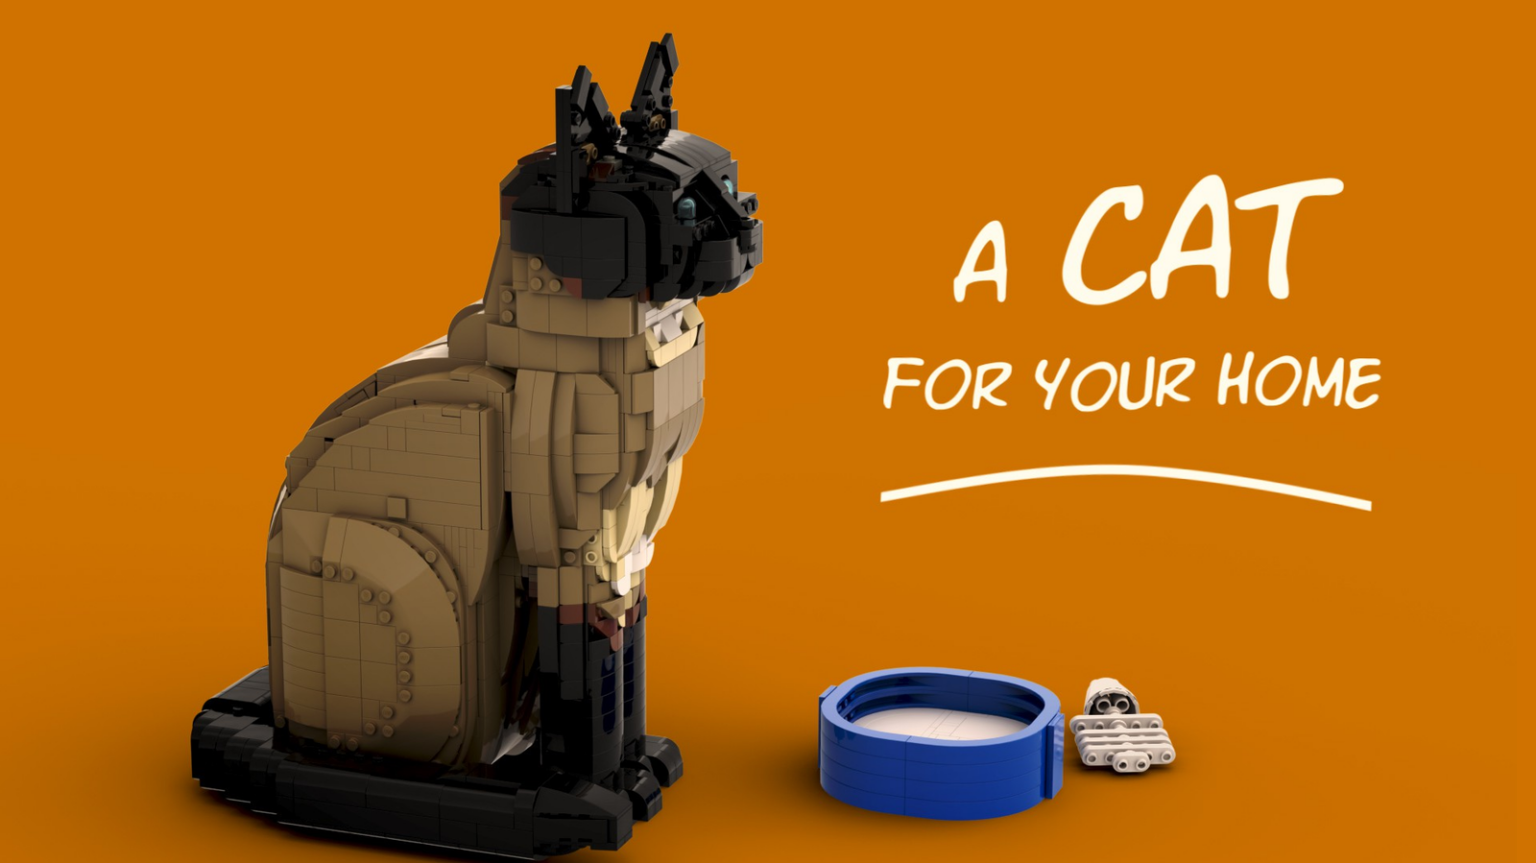 LEGO Jaws and a Cat are your next LEGO Ideas sets! - Jay's Brick Blog